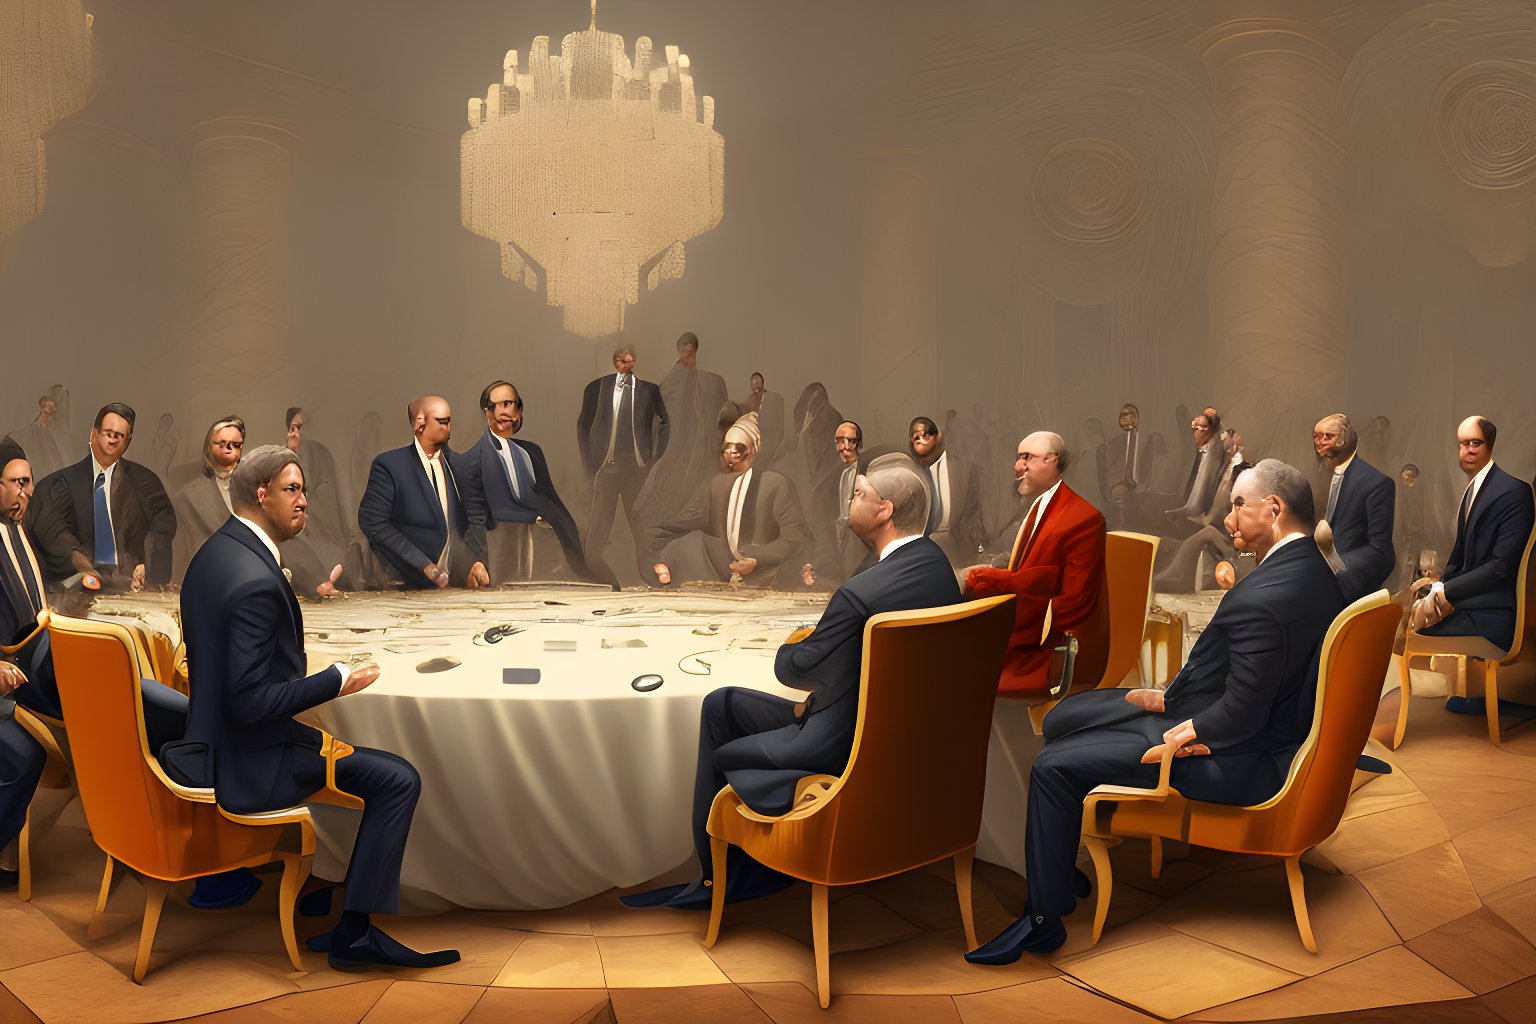 mdjrny-v4 style CEOs of major tech companies, with clear faces, sitting around a big round table, in a mansion, CEOs have ominous look, some are wearing cult clothing